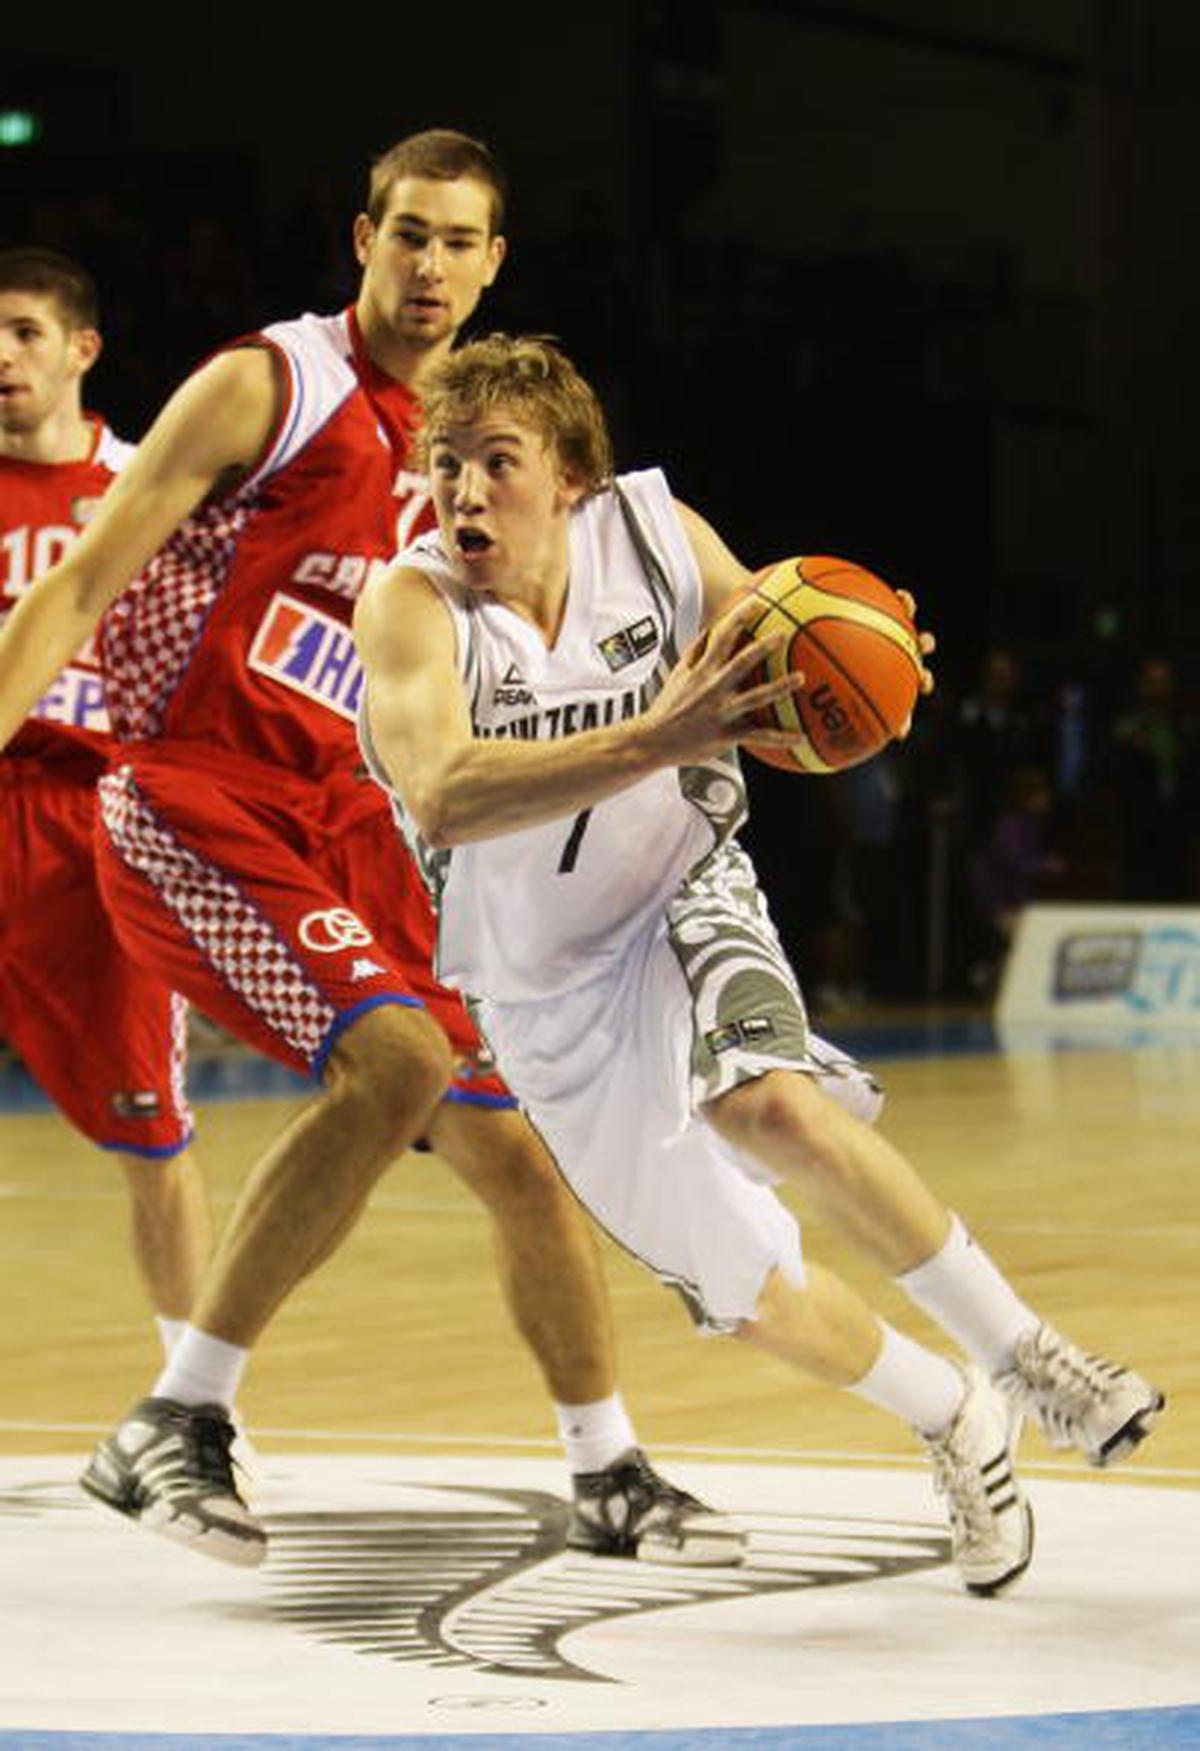 Many strings to his bow: An accomplished all-around athlete, van Beek represented New Zealand at the Under-19 basketball World Championship in 2009. 